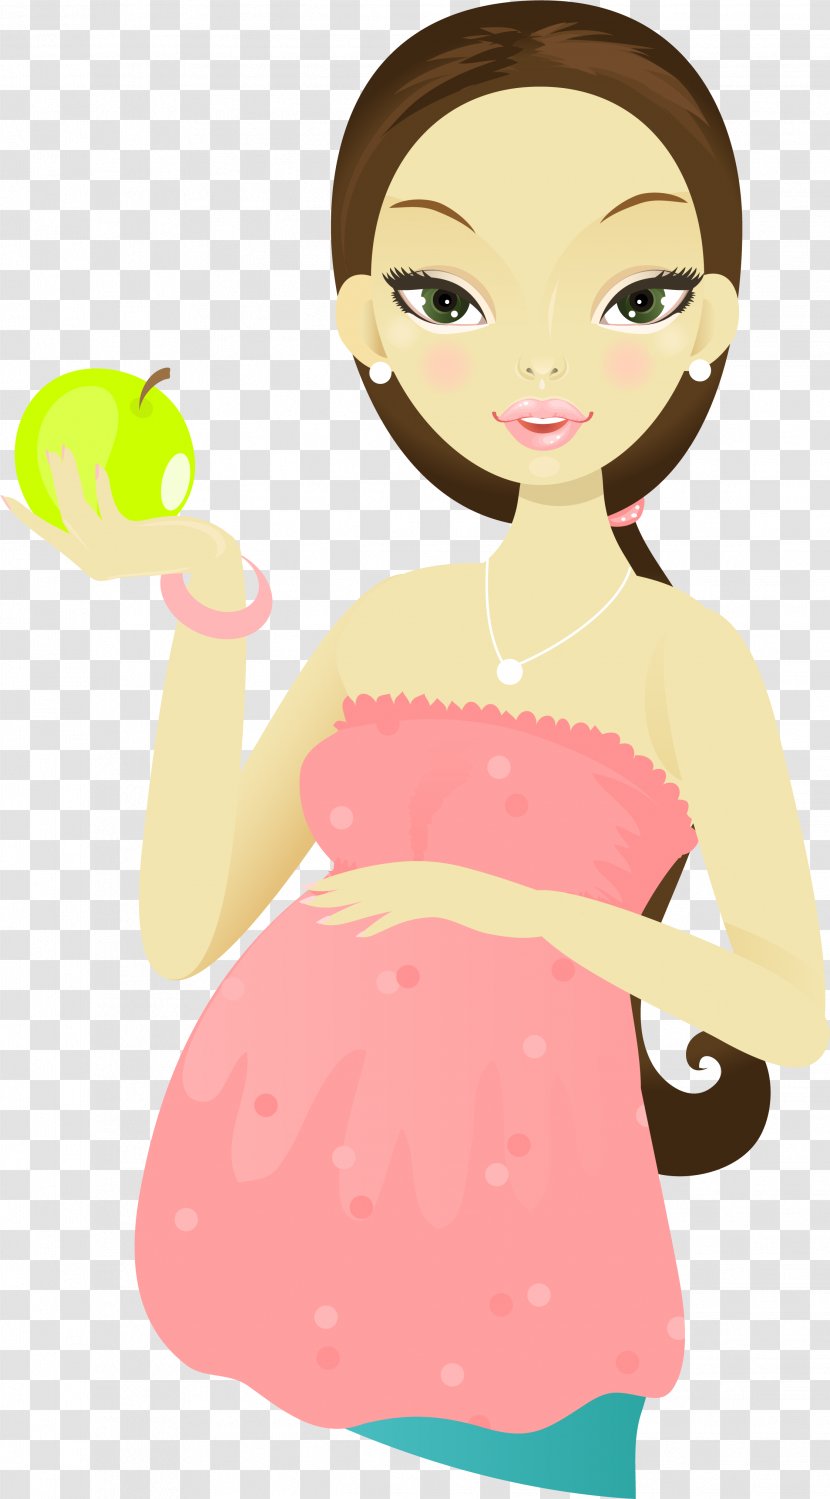 Pregnancy Cartoon Woman Mother - Heart - Pregnant Holding Apple Transparent PNG